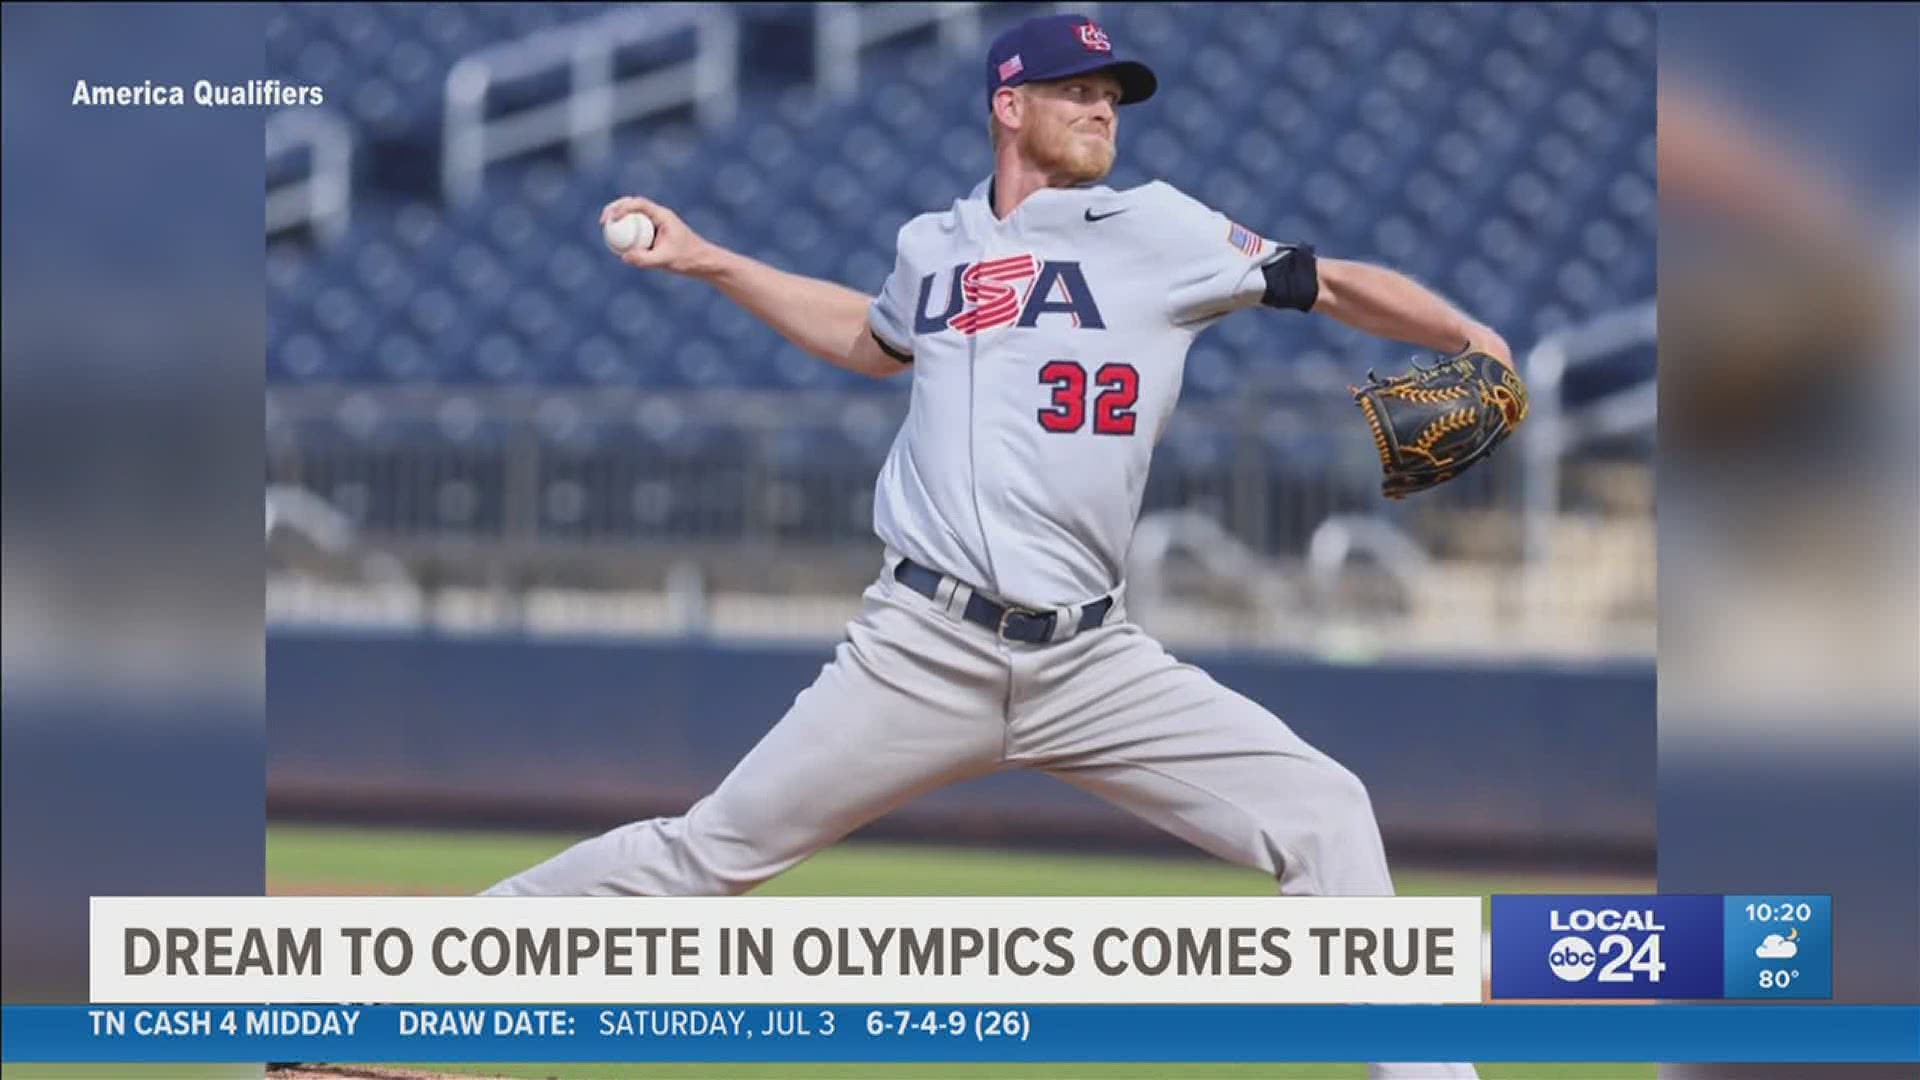 Brandon Dixon's baseball career started off rocky, but now he's headed to Tokyo to play for the USA in the Olympics.